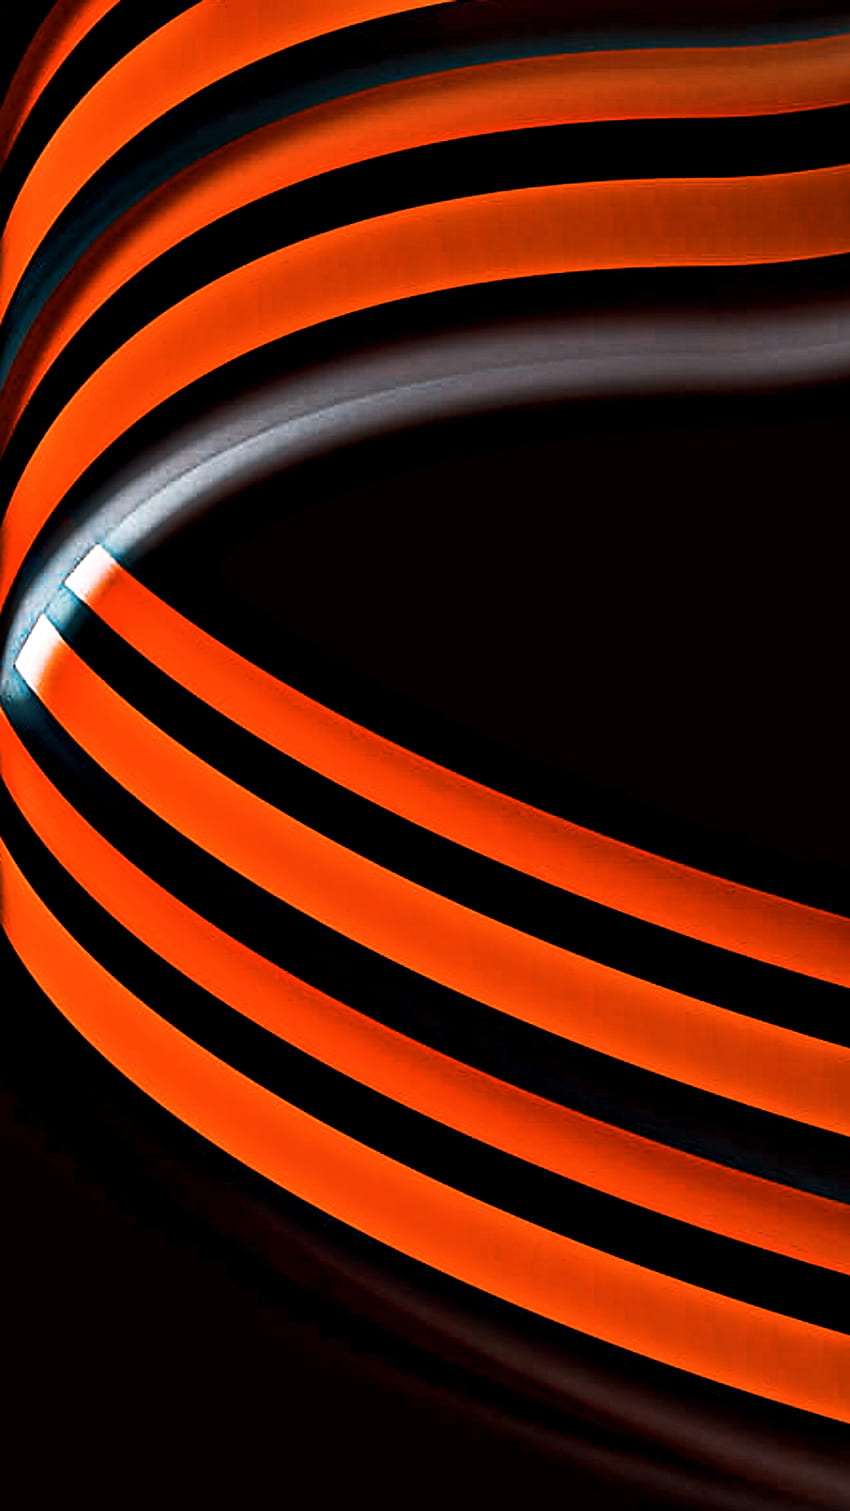 ghhkj, tech, waves, new, neon, cool, black, bright, oled, pattern, abstract, digial, orange, 3d, amoled, curves, material, modern, future, , design, gamer, shiny, , graphic HD phone wallpaper